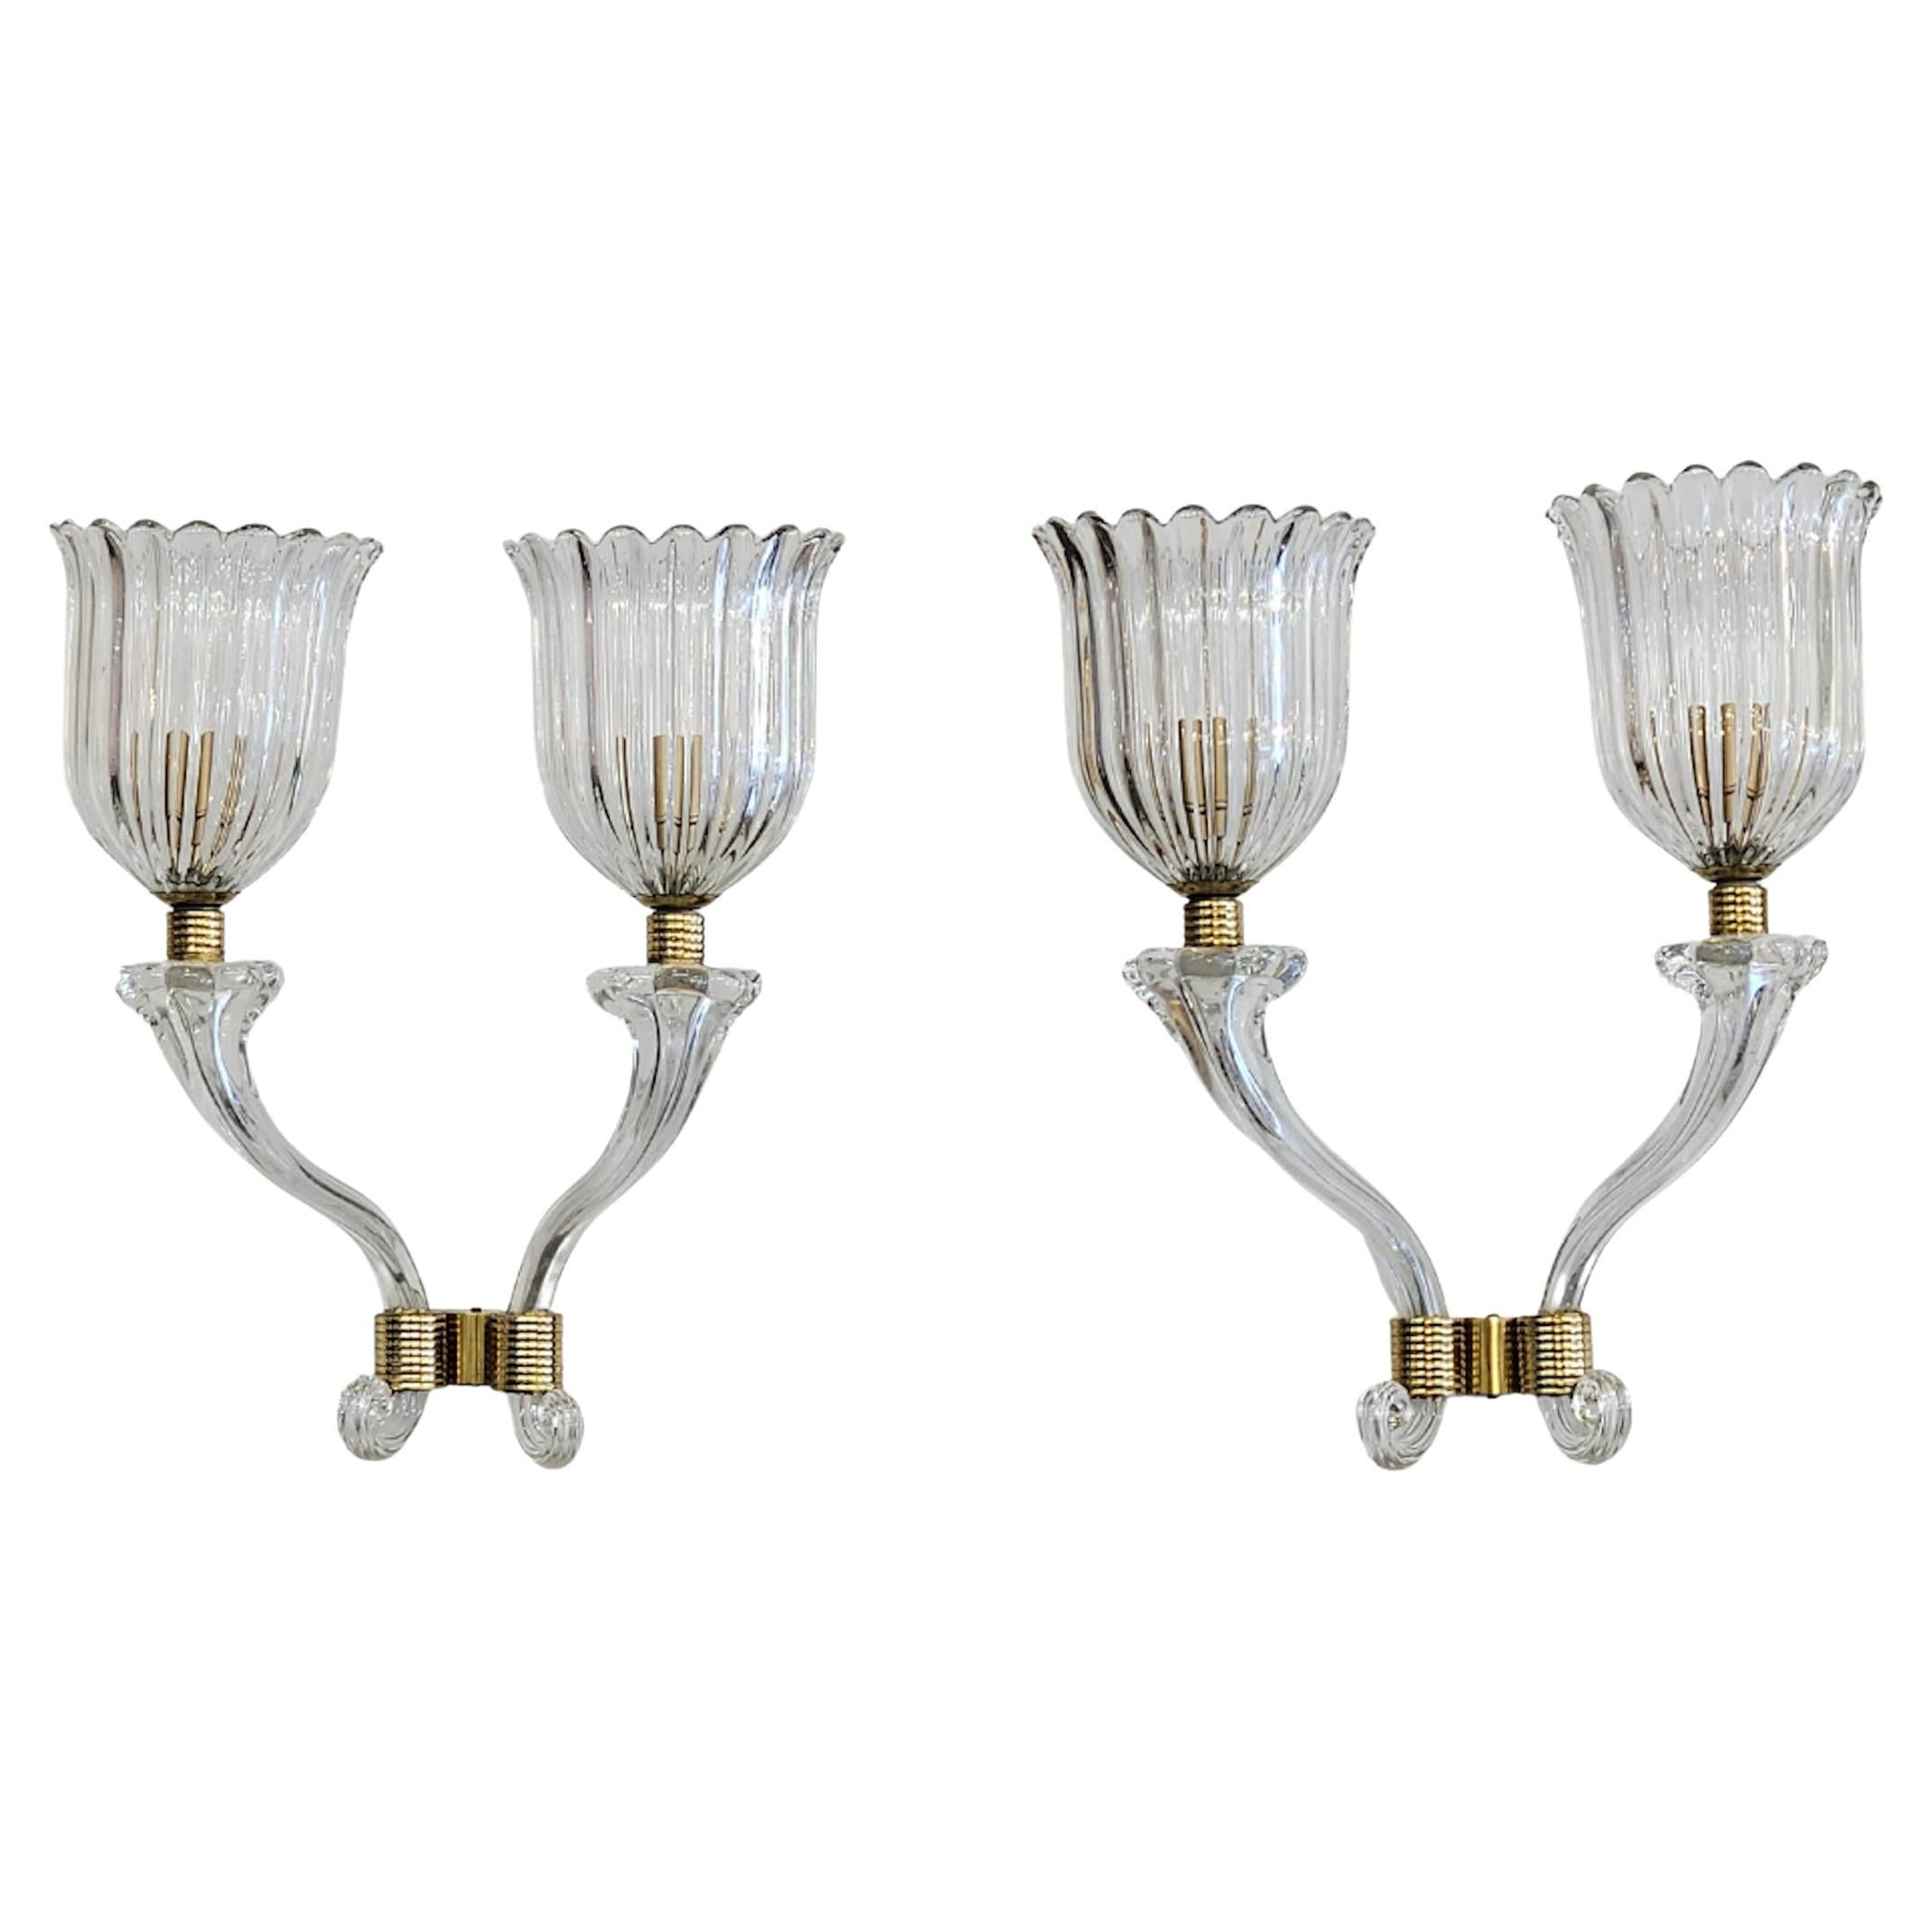 Pair of 1940s Murano Glass Tulip Cup Wall Sconces by Barovier & Toso For Sale